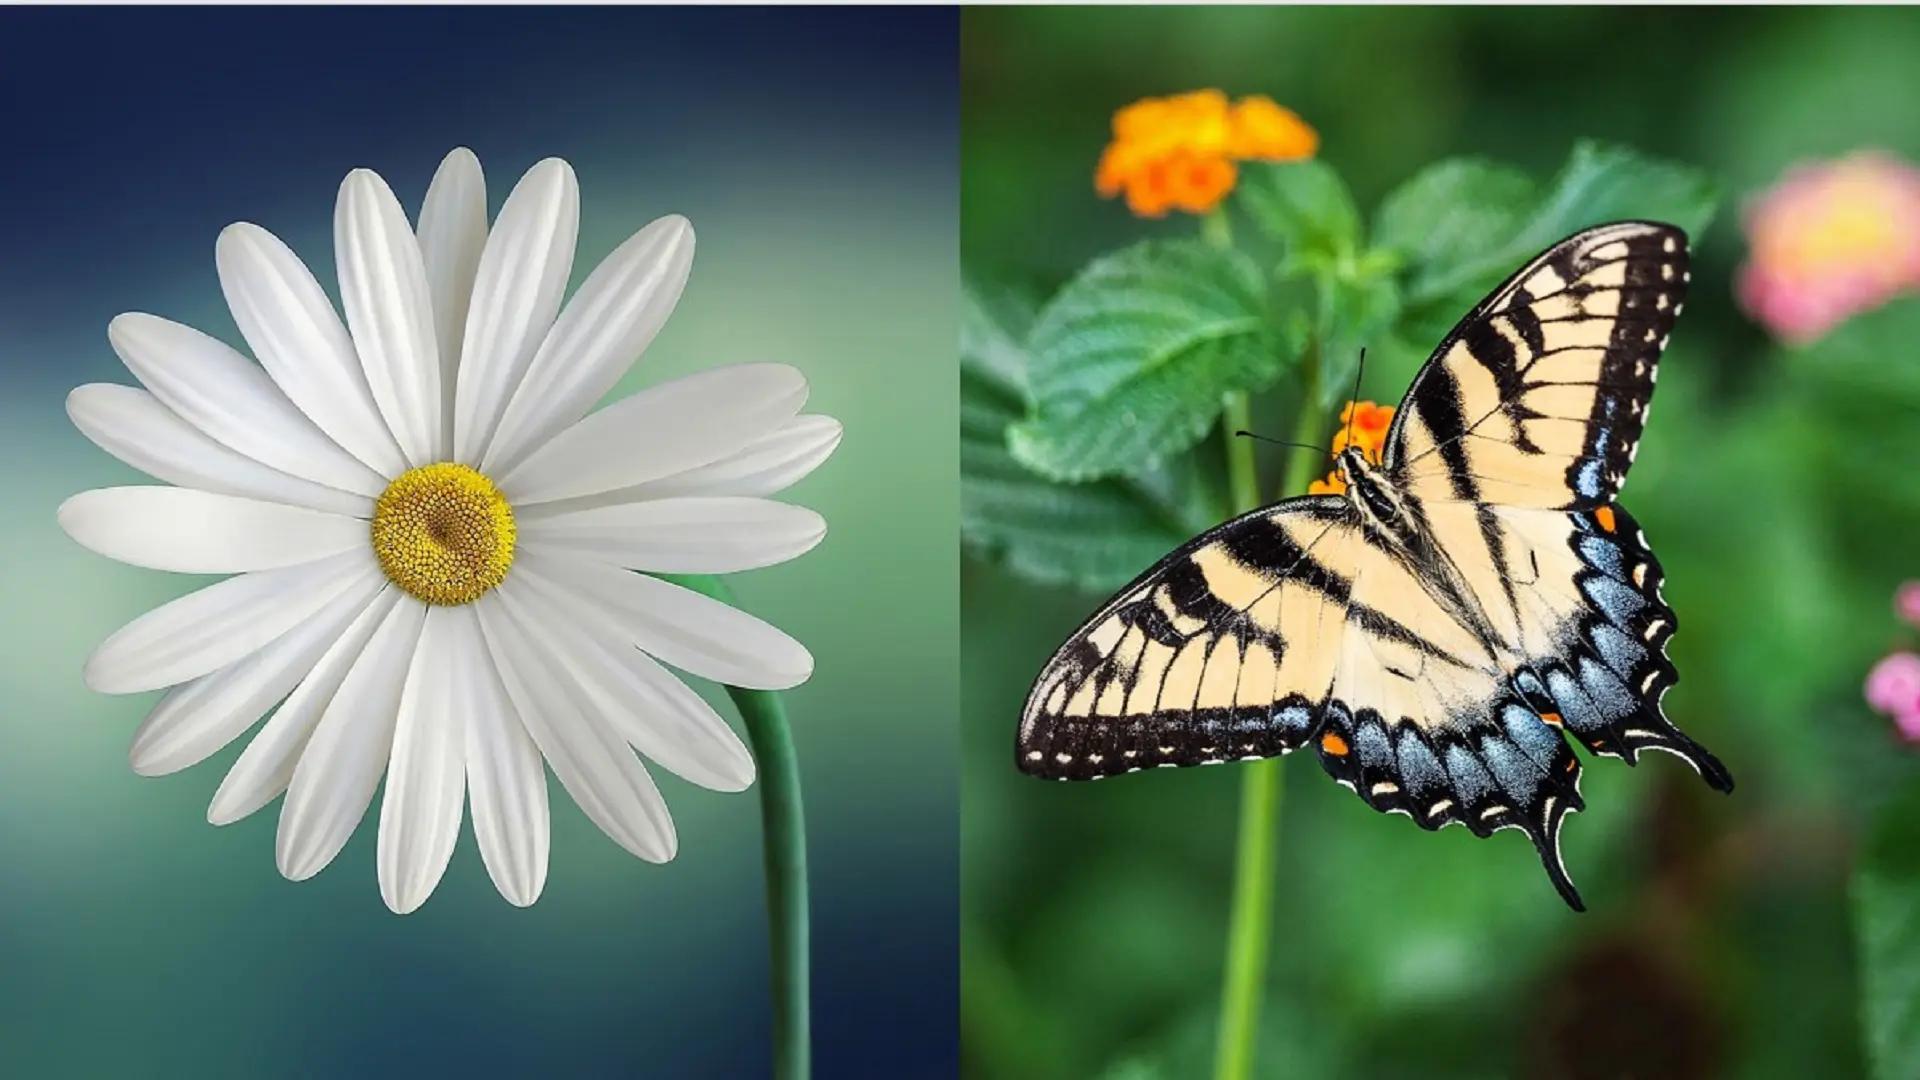 A flower and a butterfly to illustrate symmetry